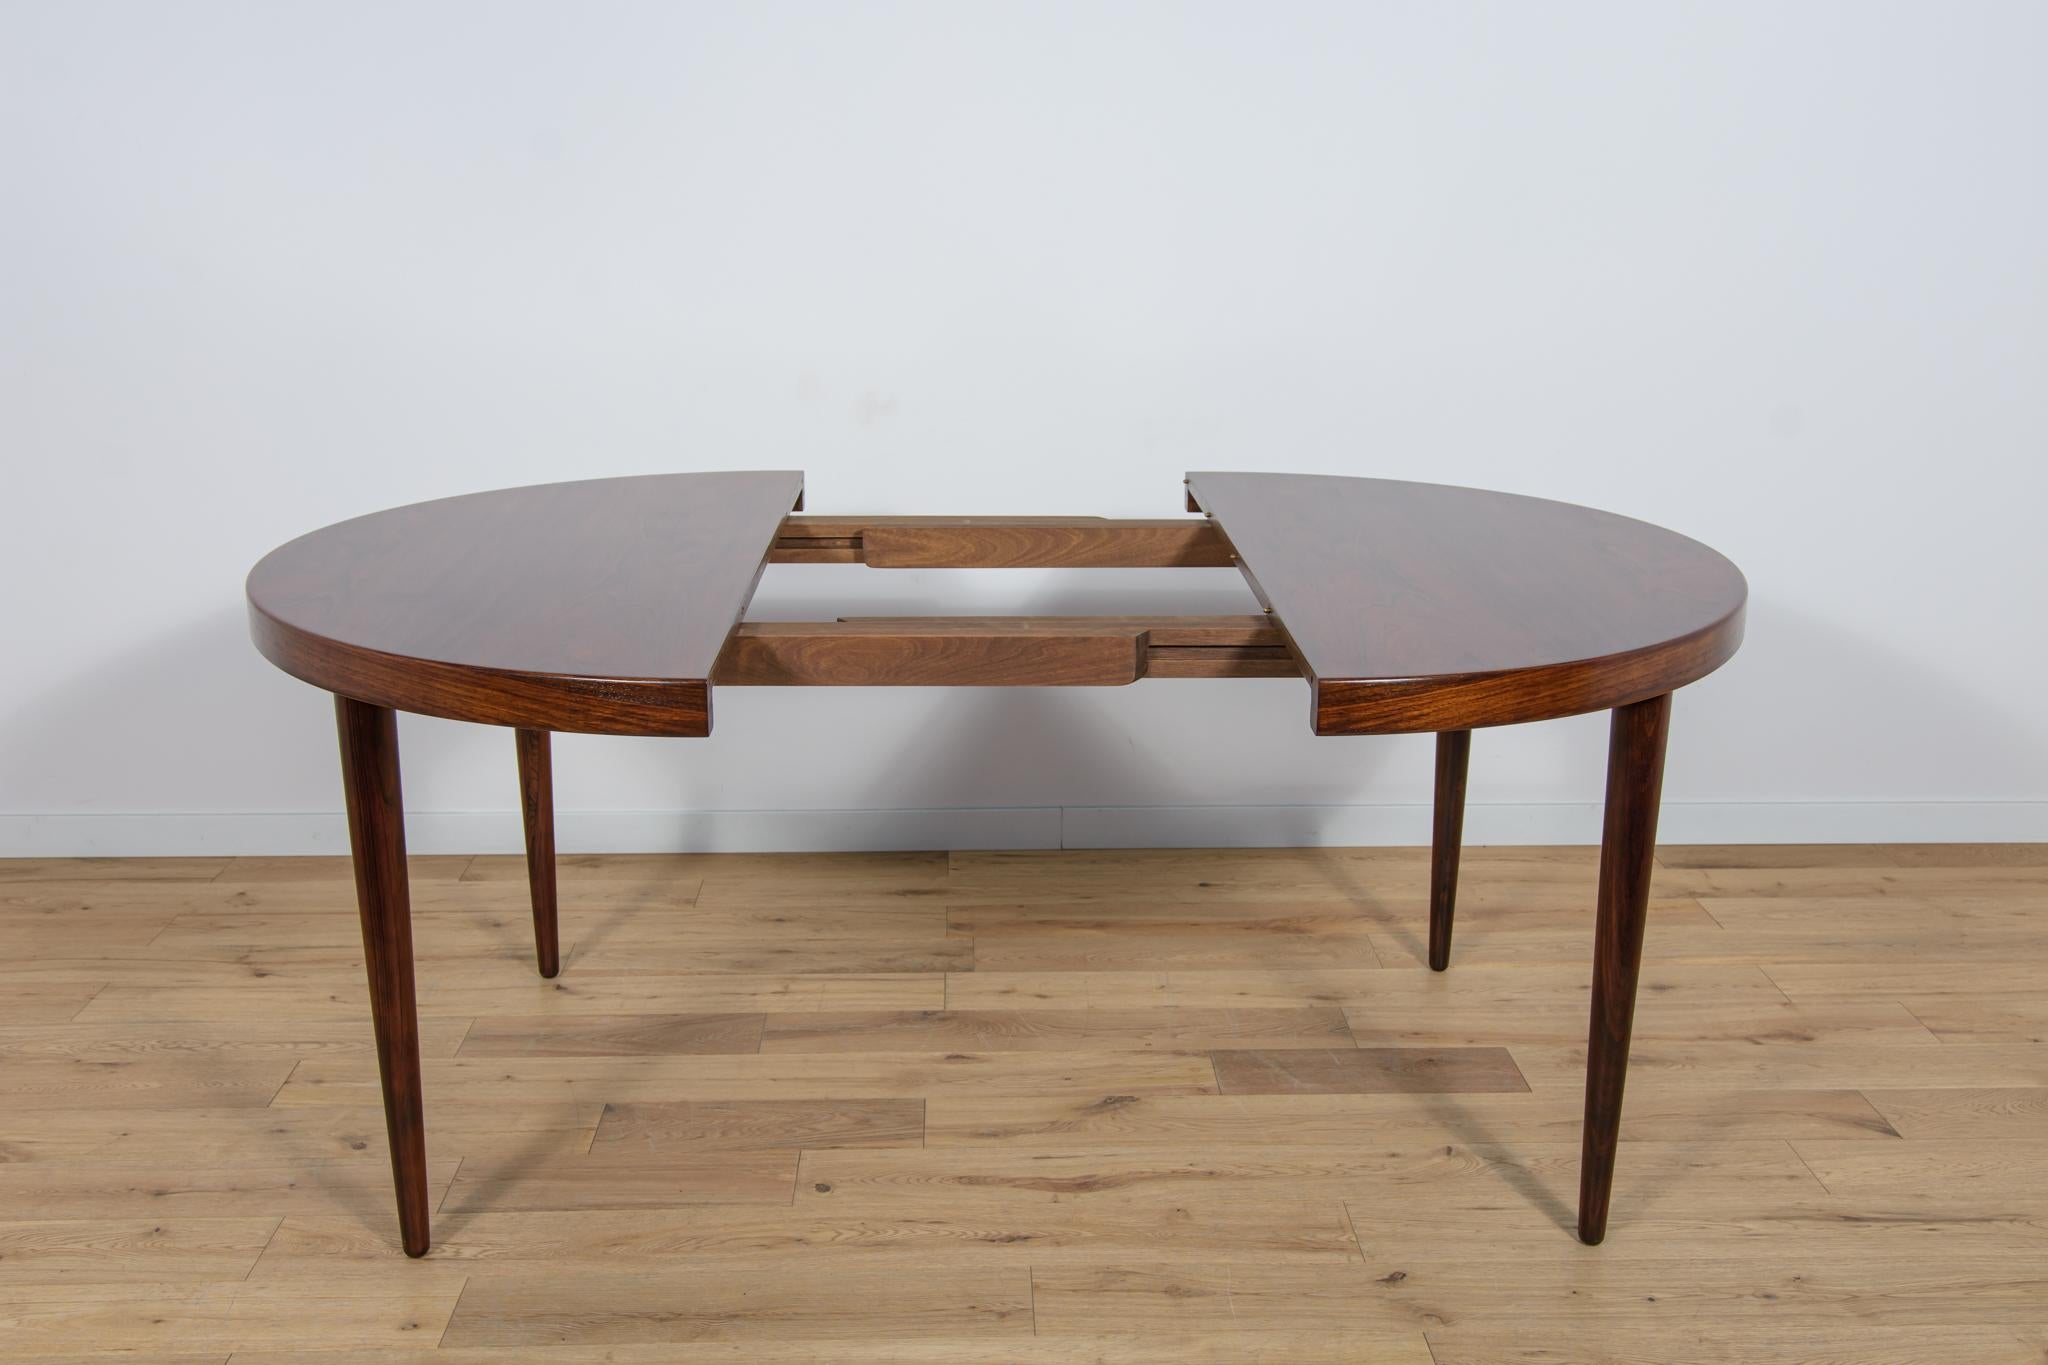  Mid-Century Extendable Rosewood Dining Table by Kai Kristiansen for Feldballes  In Excellent Condition For Sale In GNIEZNO, 30